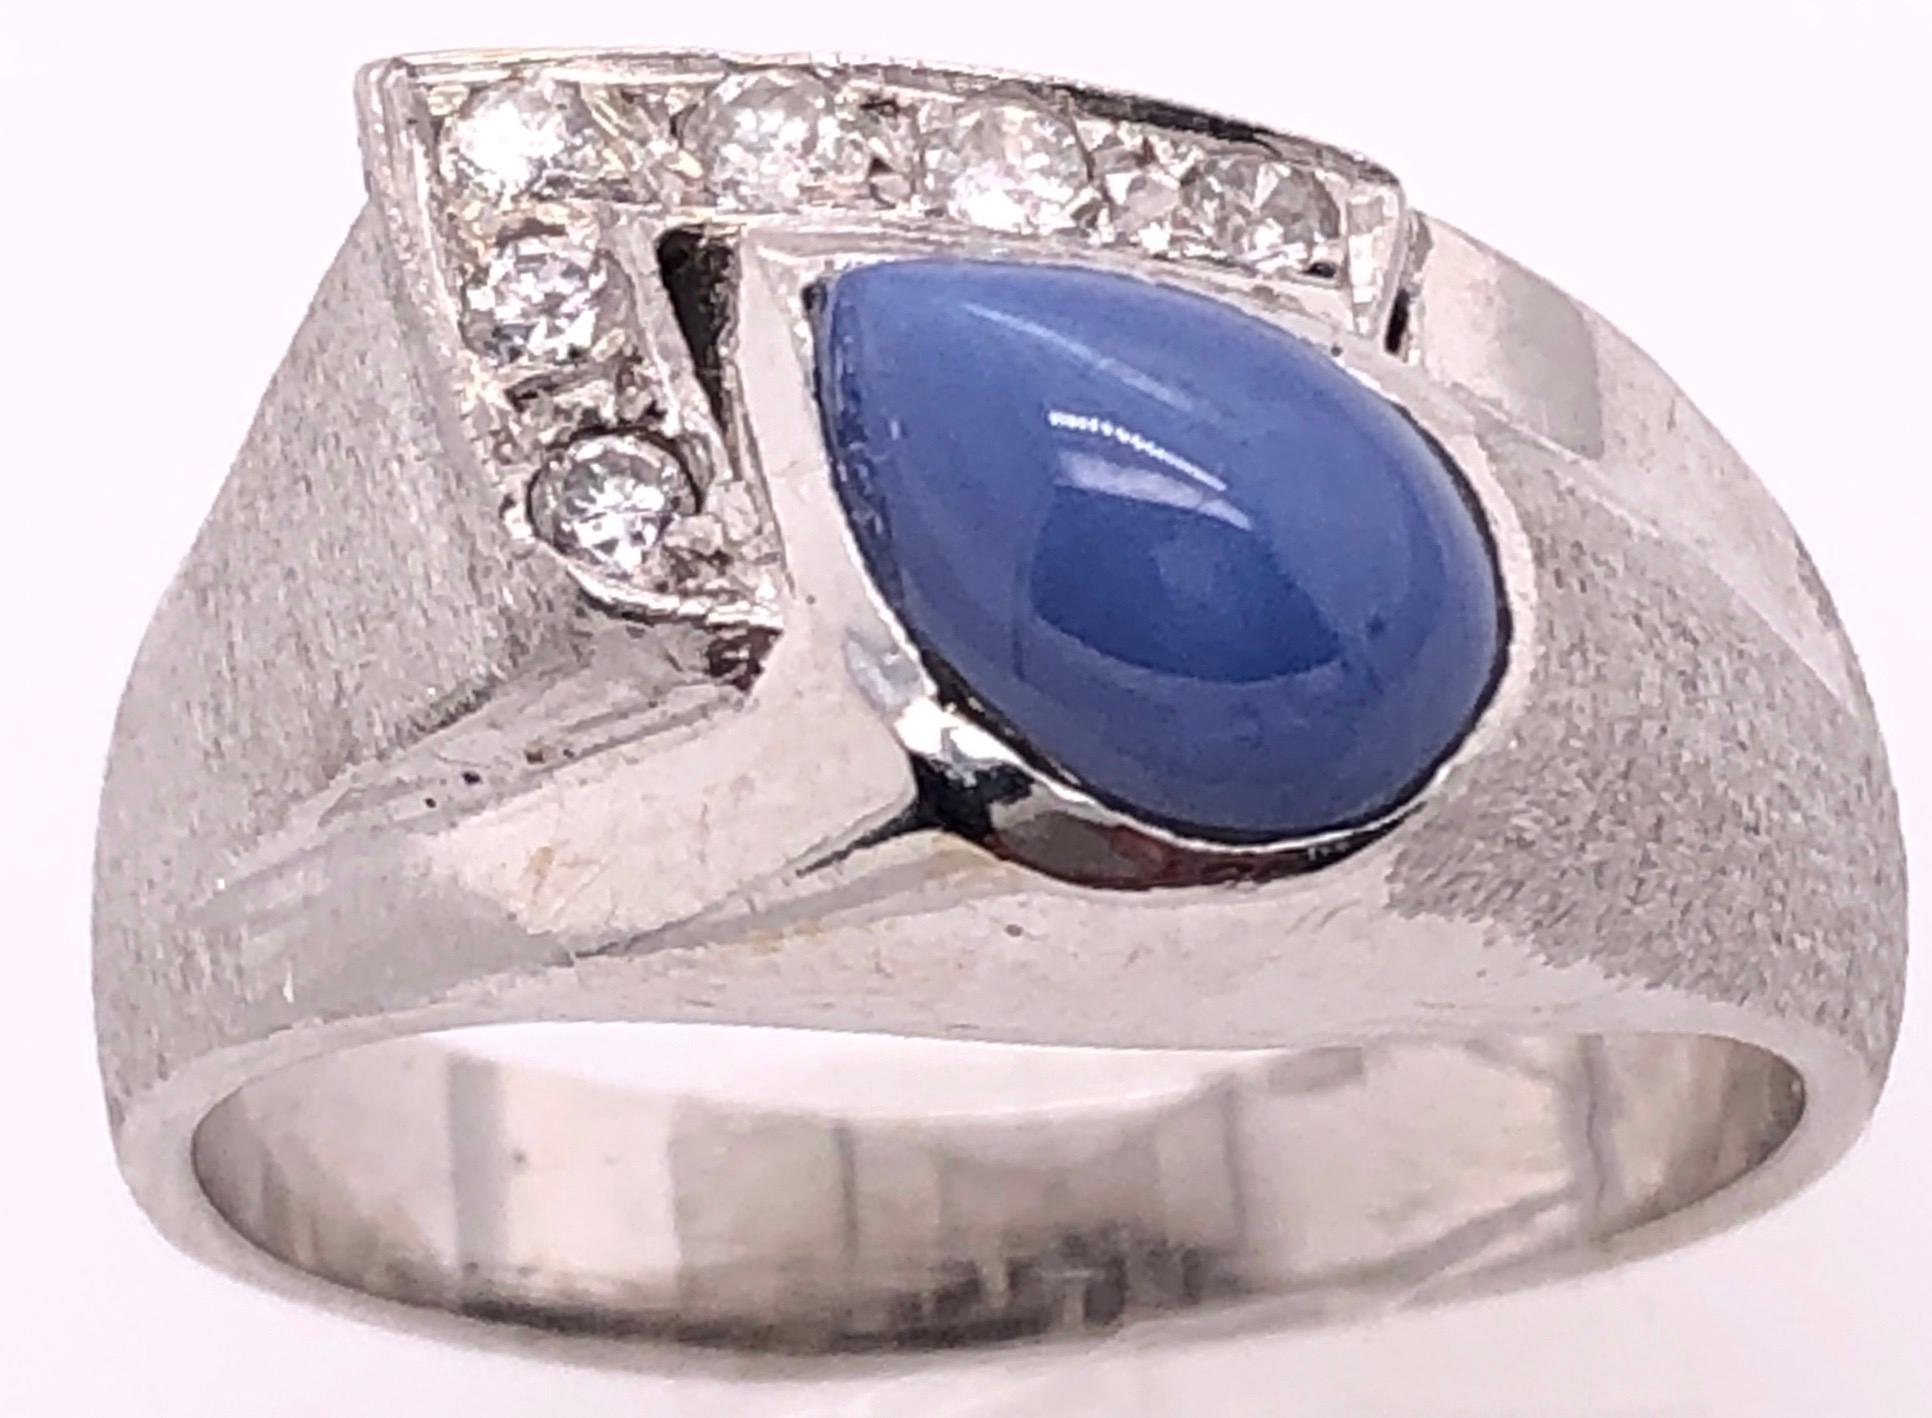 14 Karat White Gold With Teardrop Sapphire Cabochon Ring with Diamond Accents
0.25 Total Diamond Weight.
Size 9 
7.35 grams total weight.